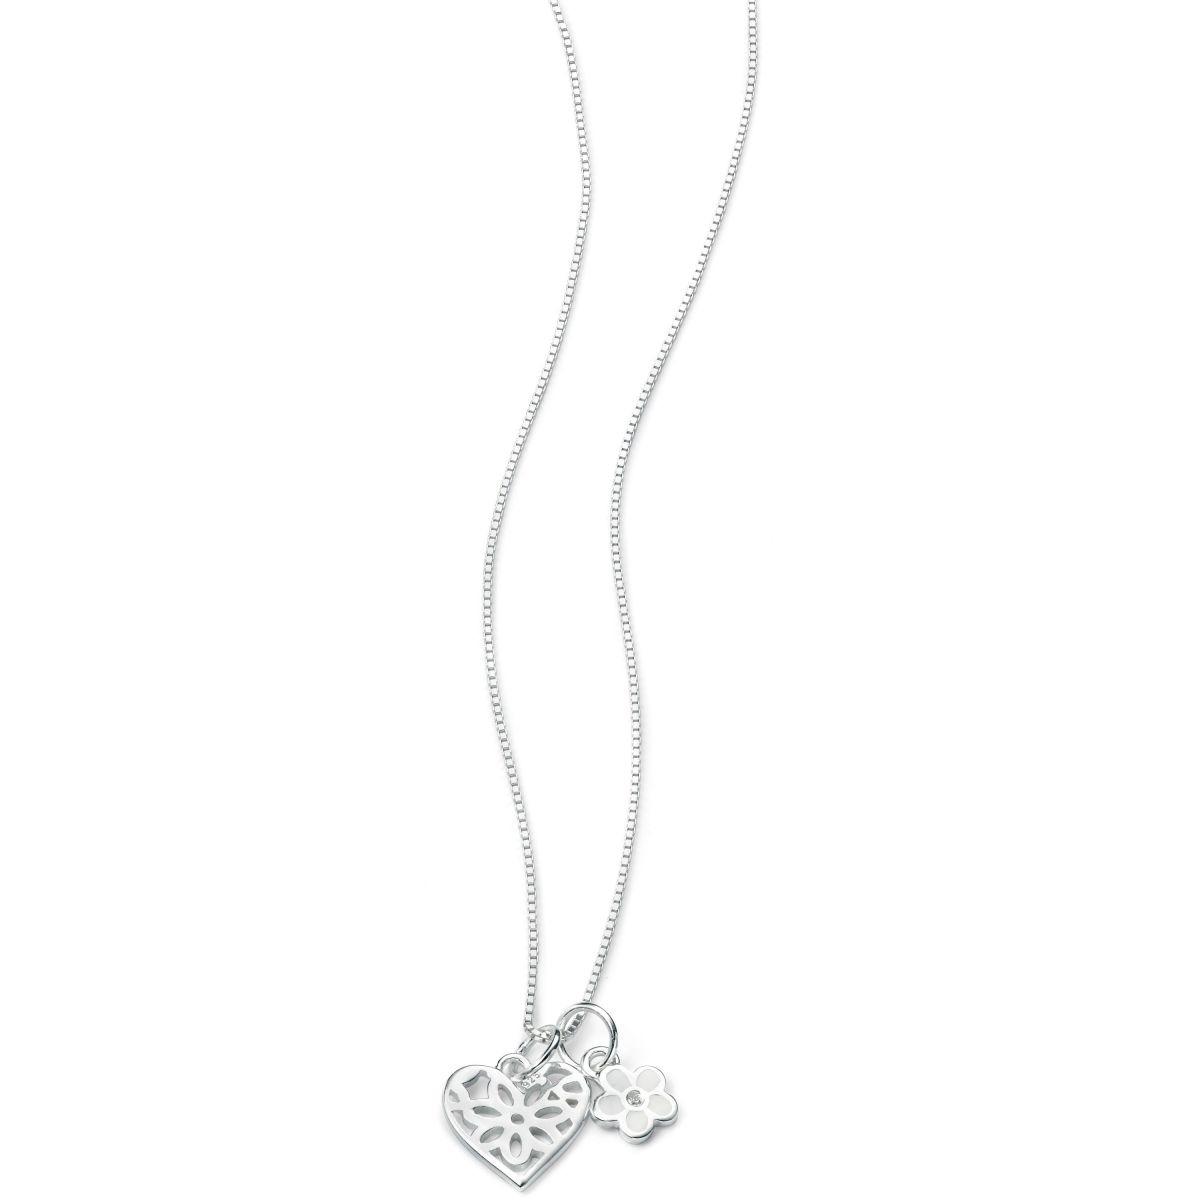 Watch Shop Necklace Silver for Women from D for Diamond GOOFASH